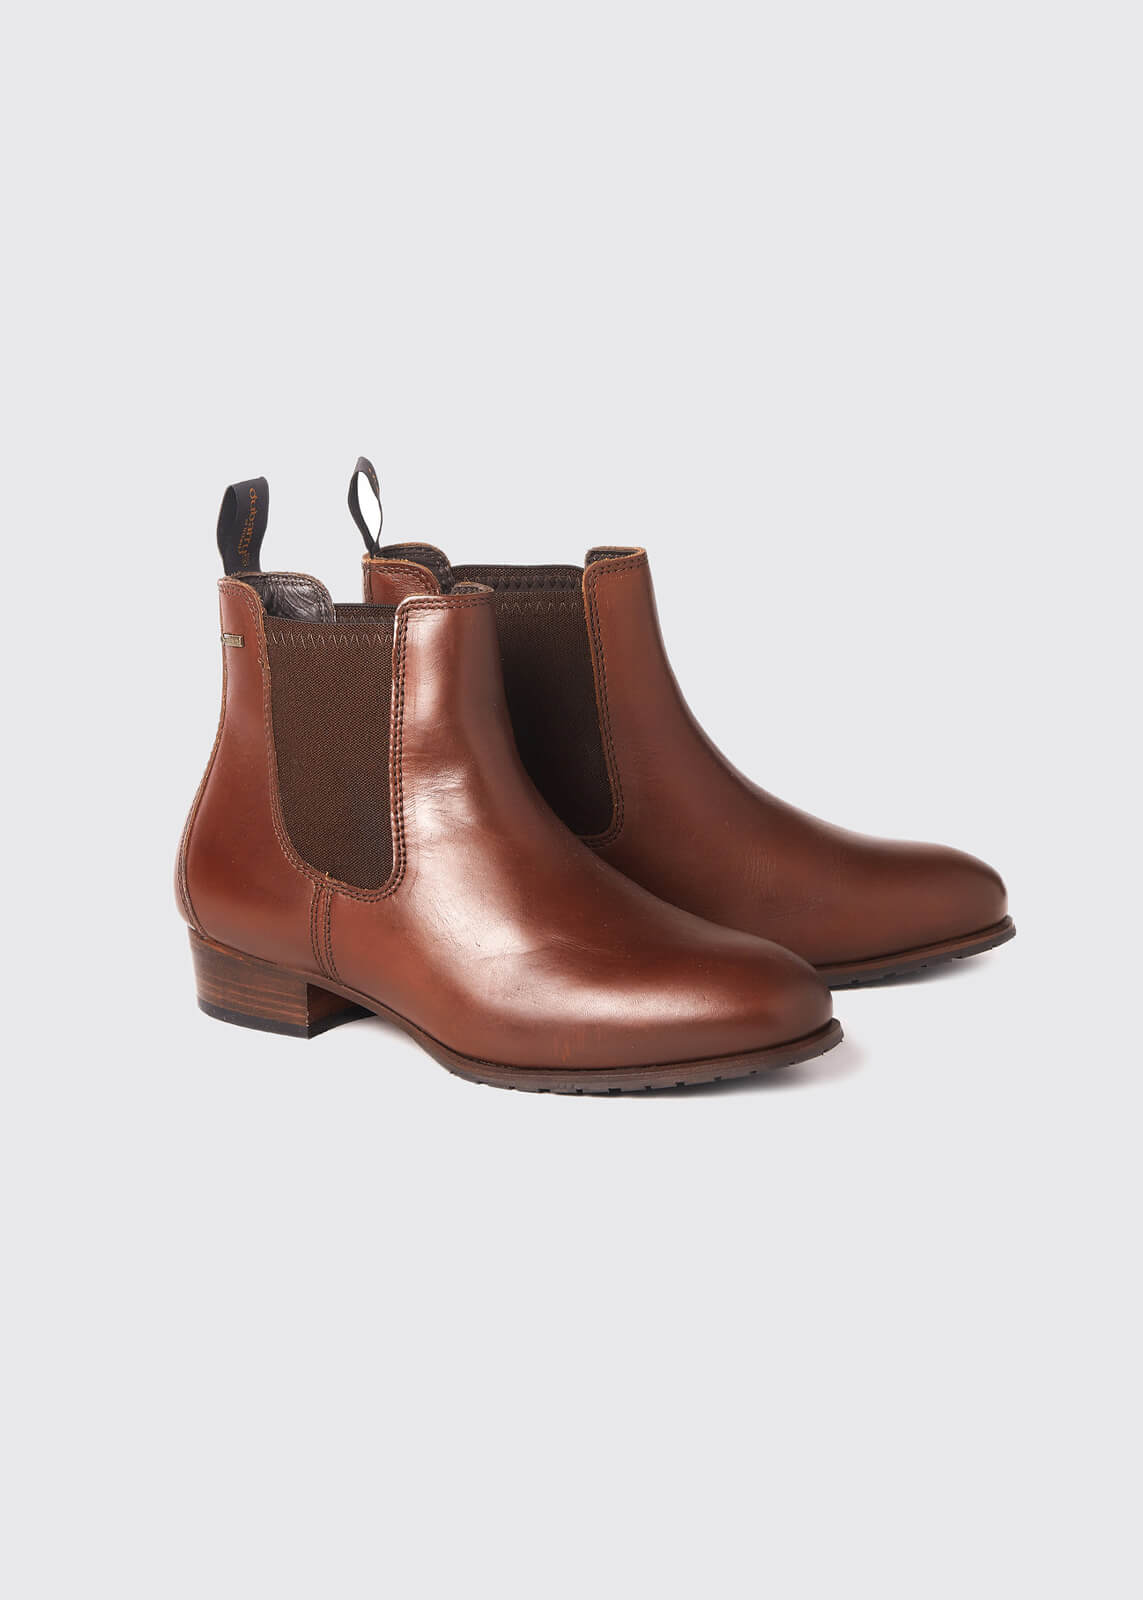 Cork Leather Soled Boot - Chestnut